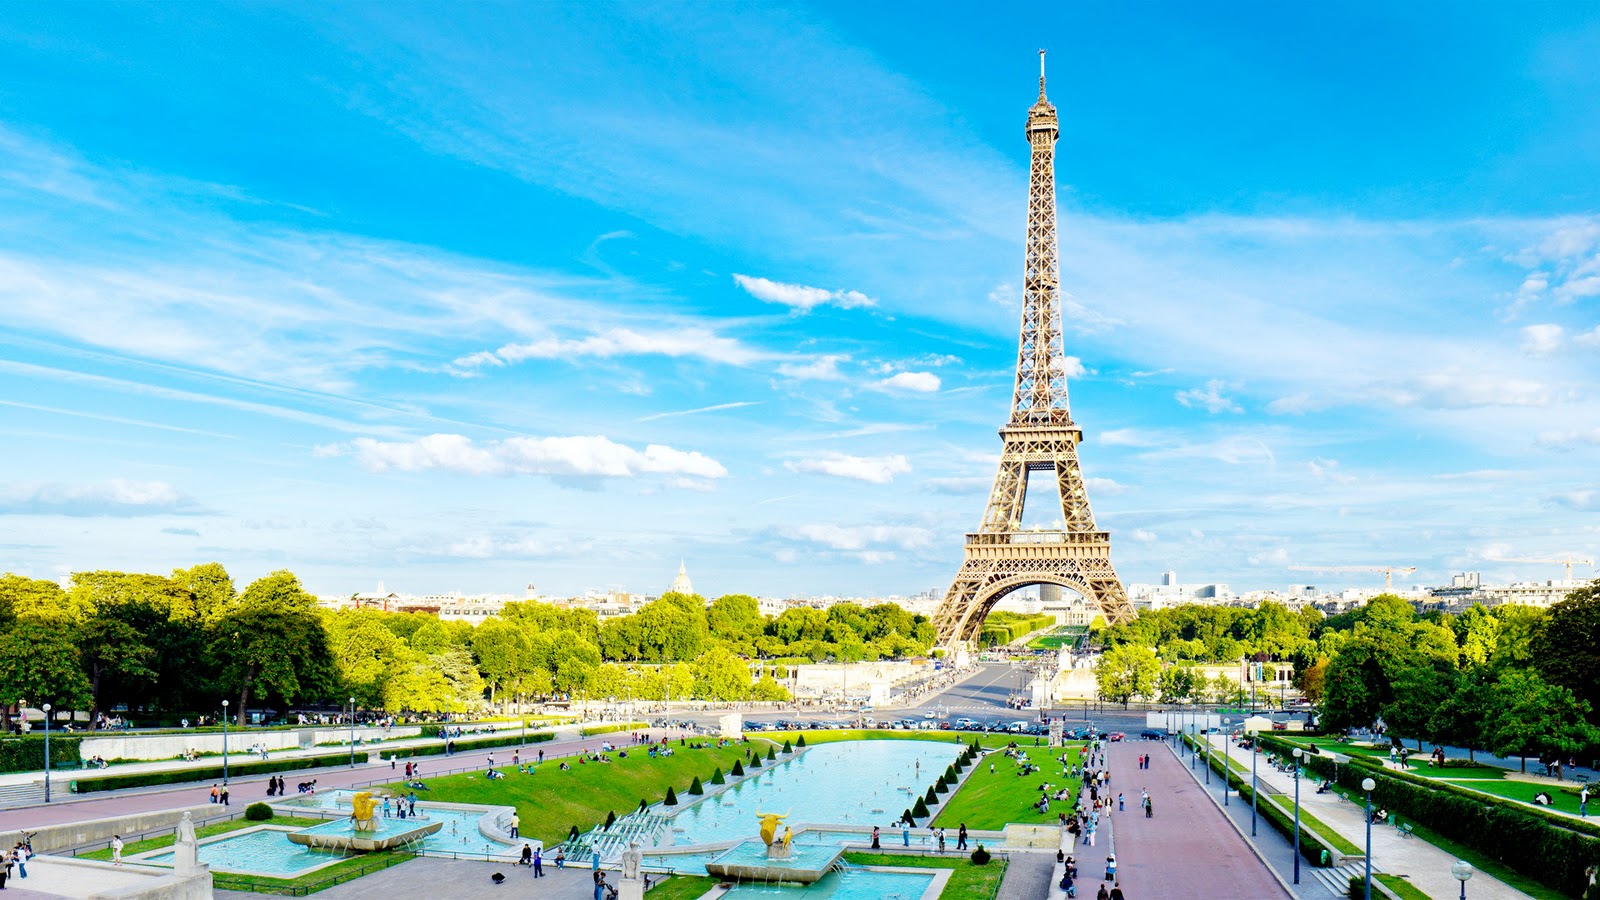 Paris City Wallpaper Pictures In High Definition Or